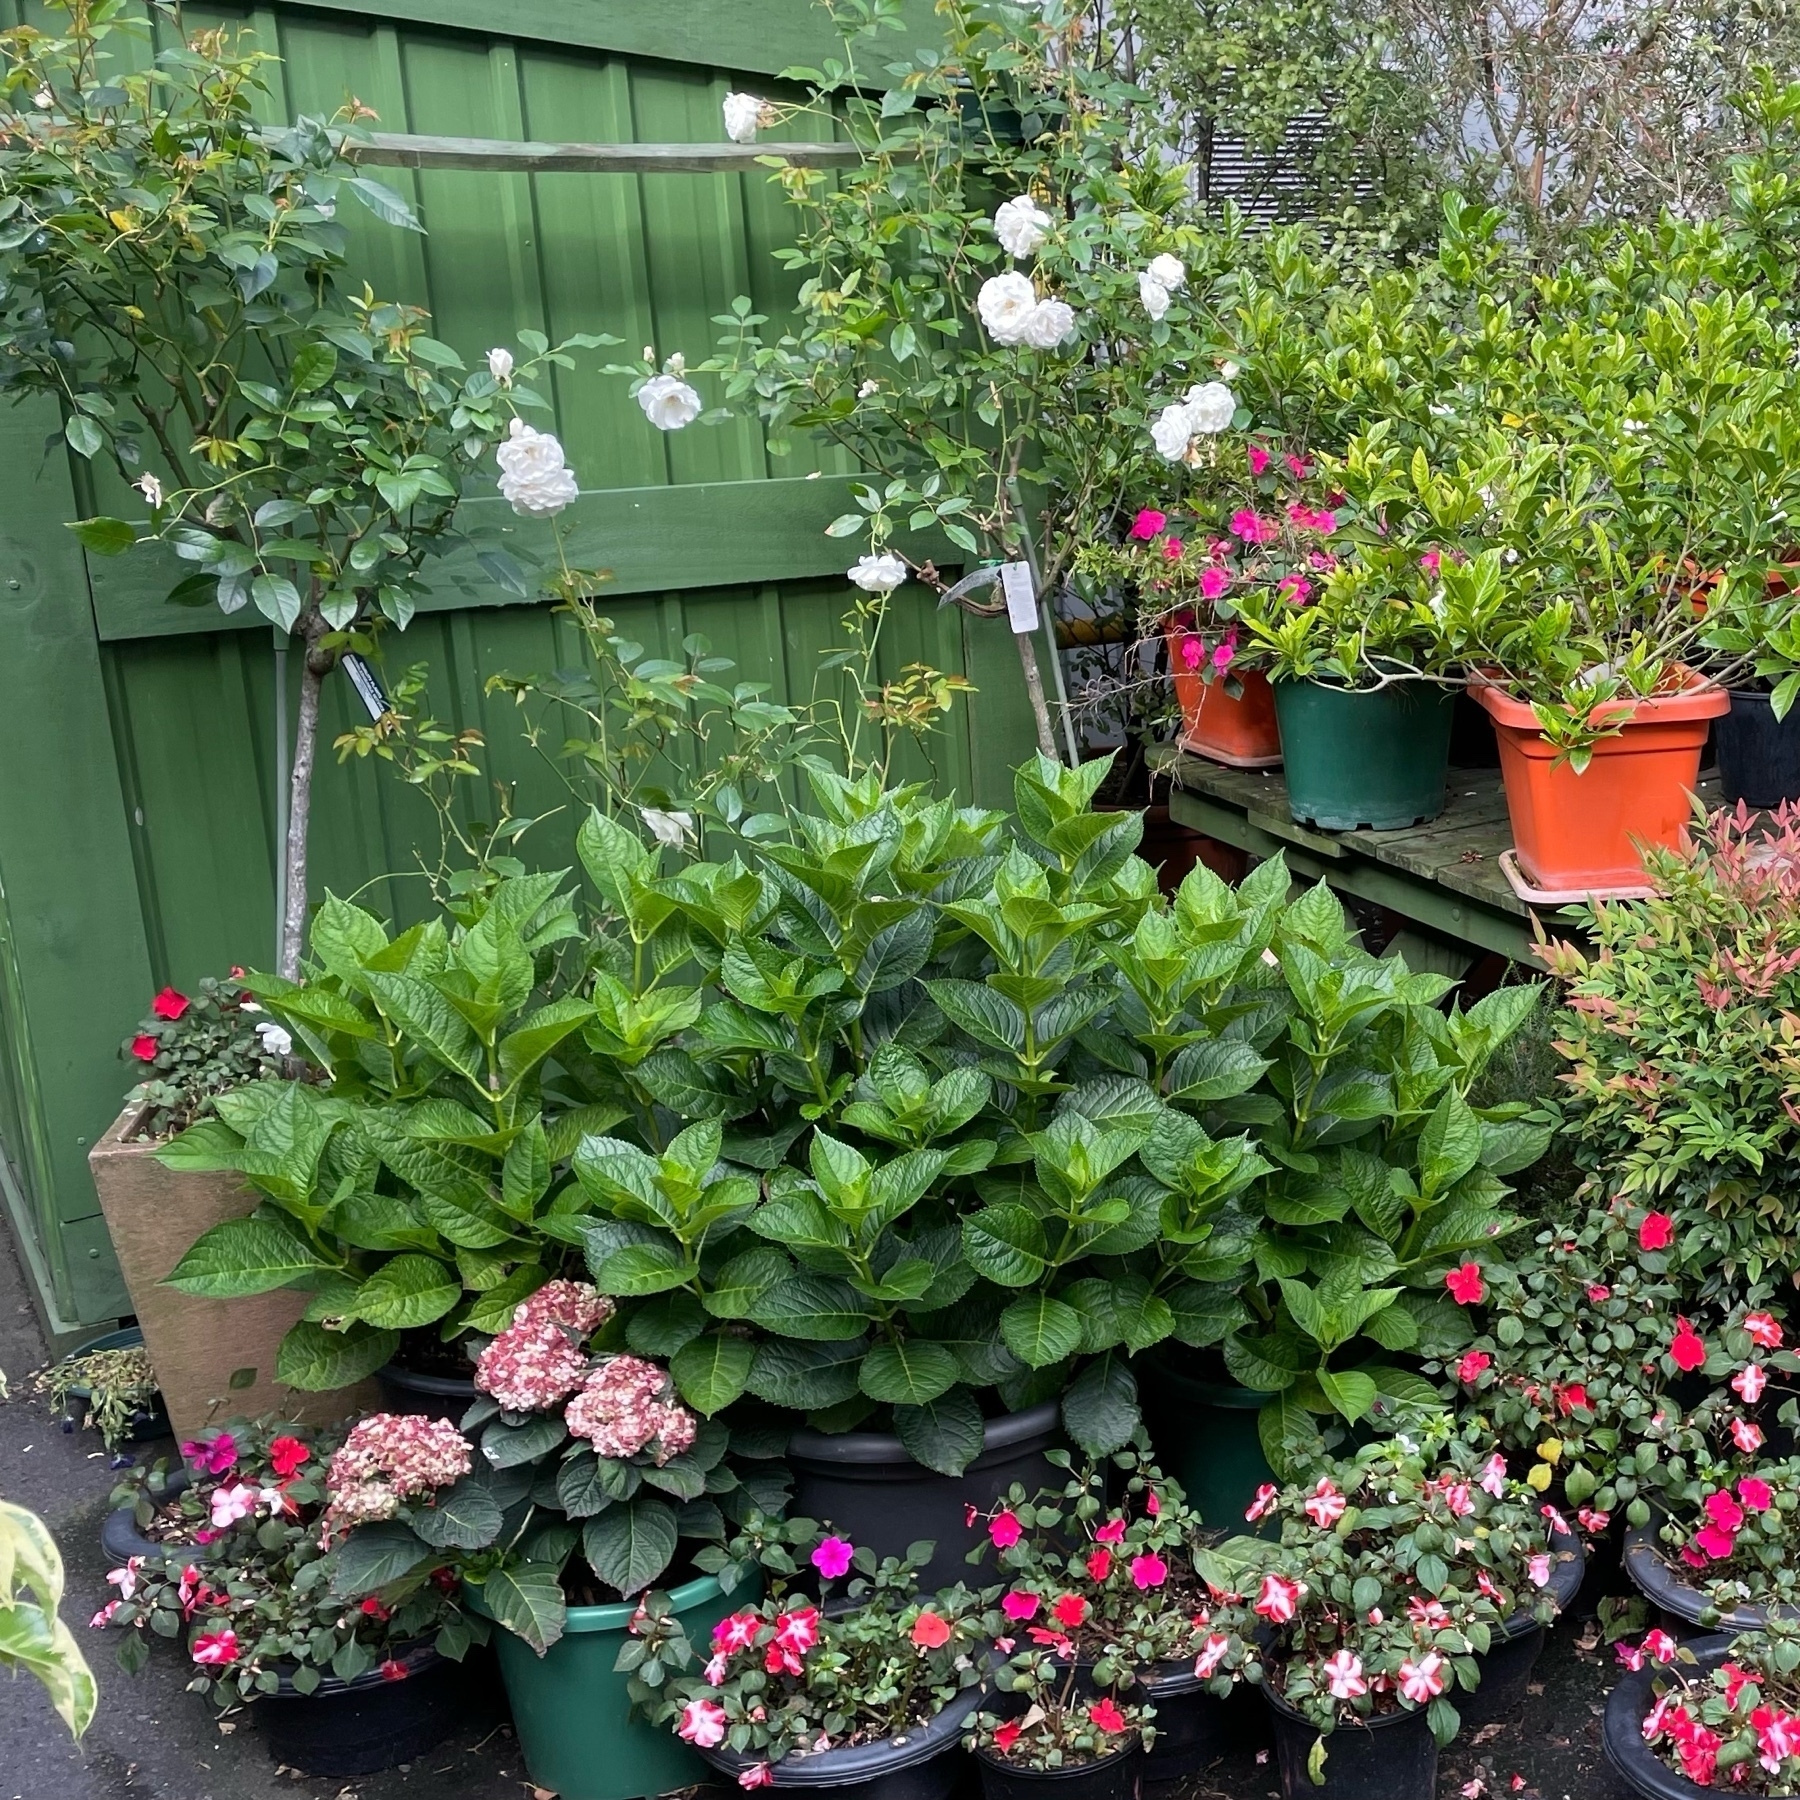 abundance of flowers in pots and planters